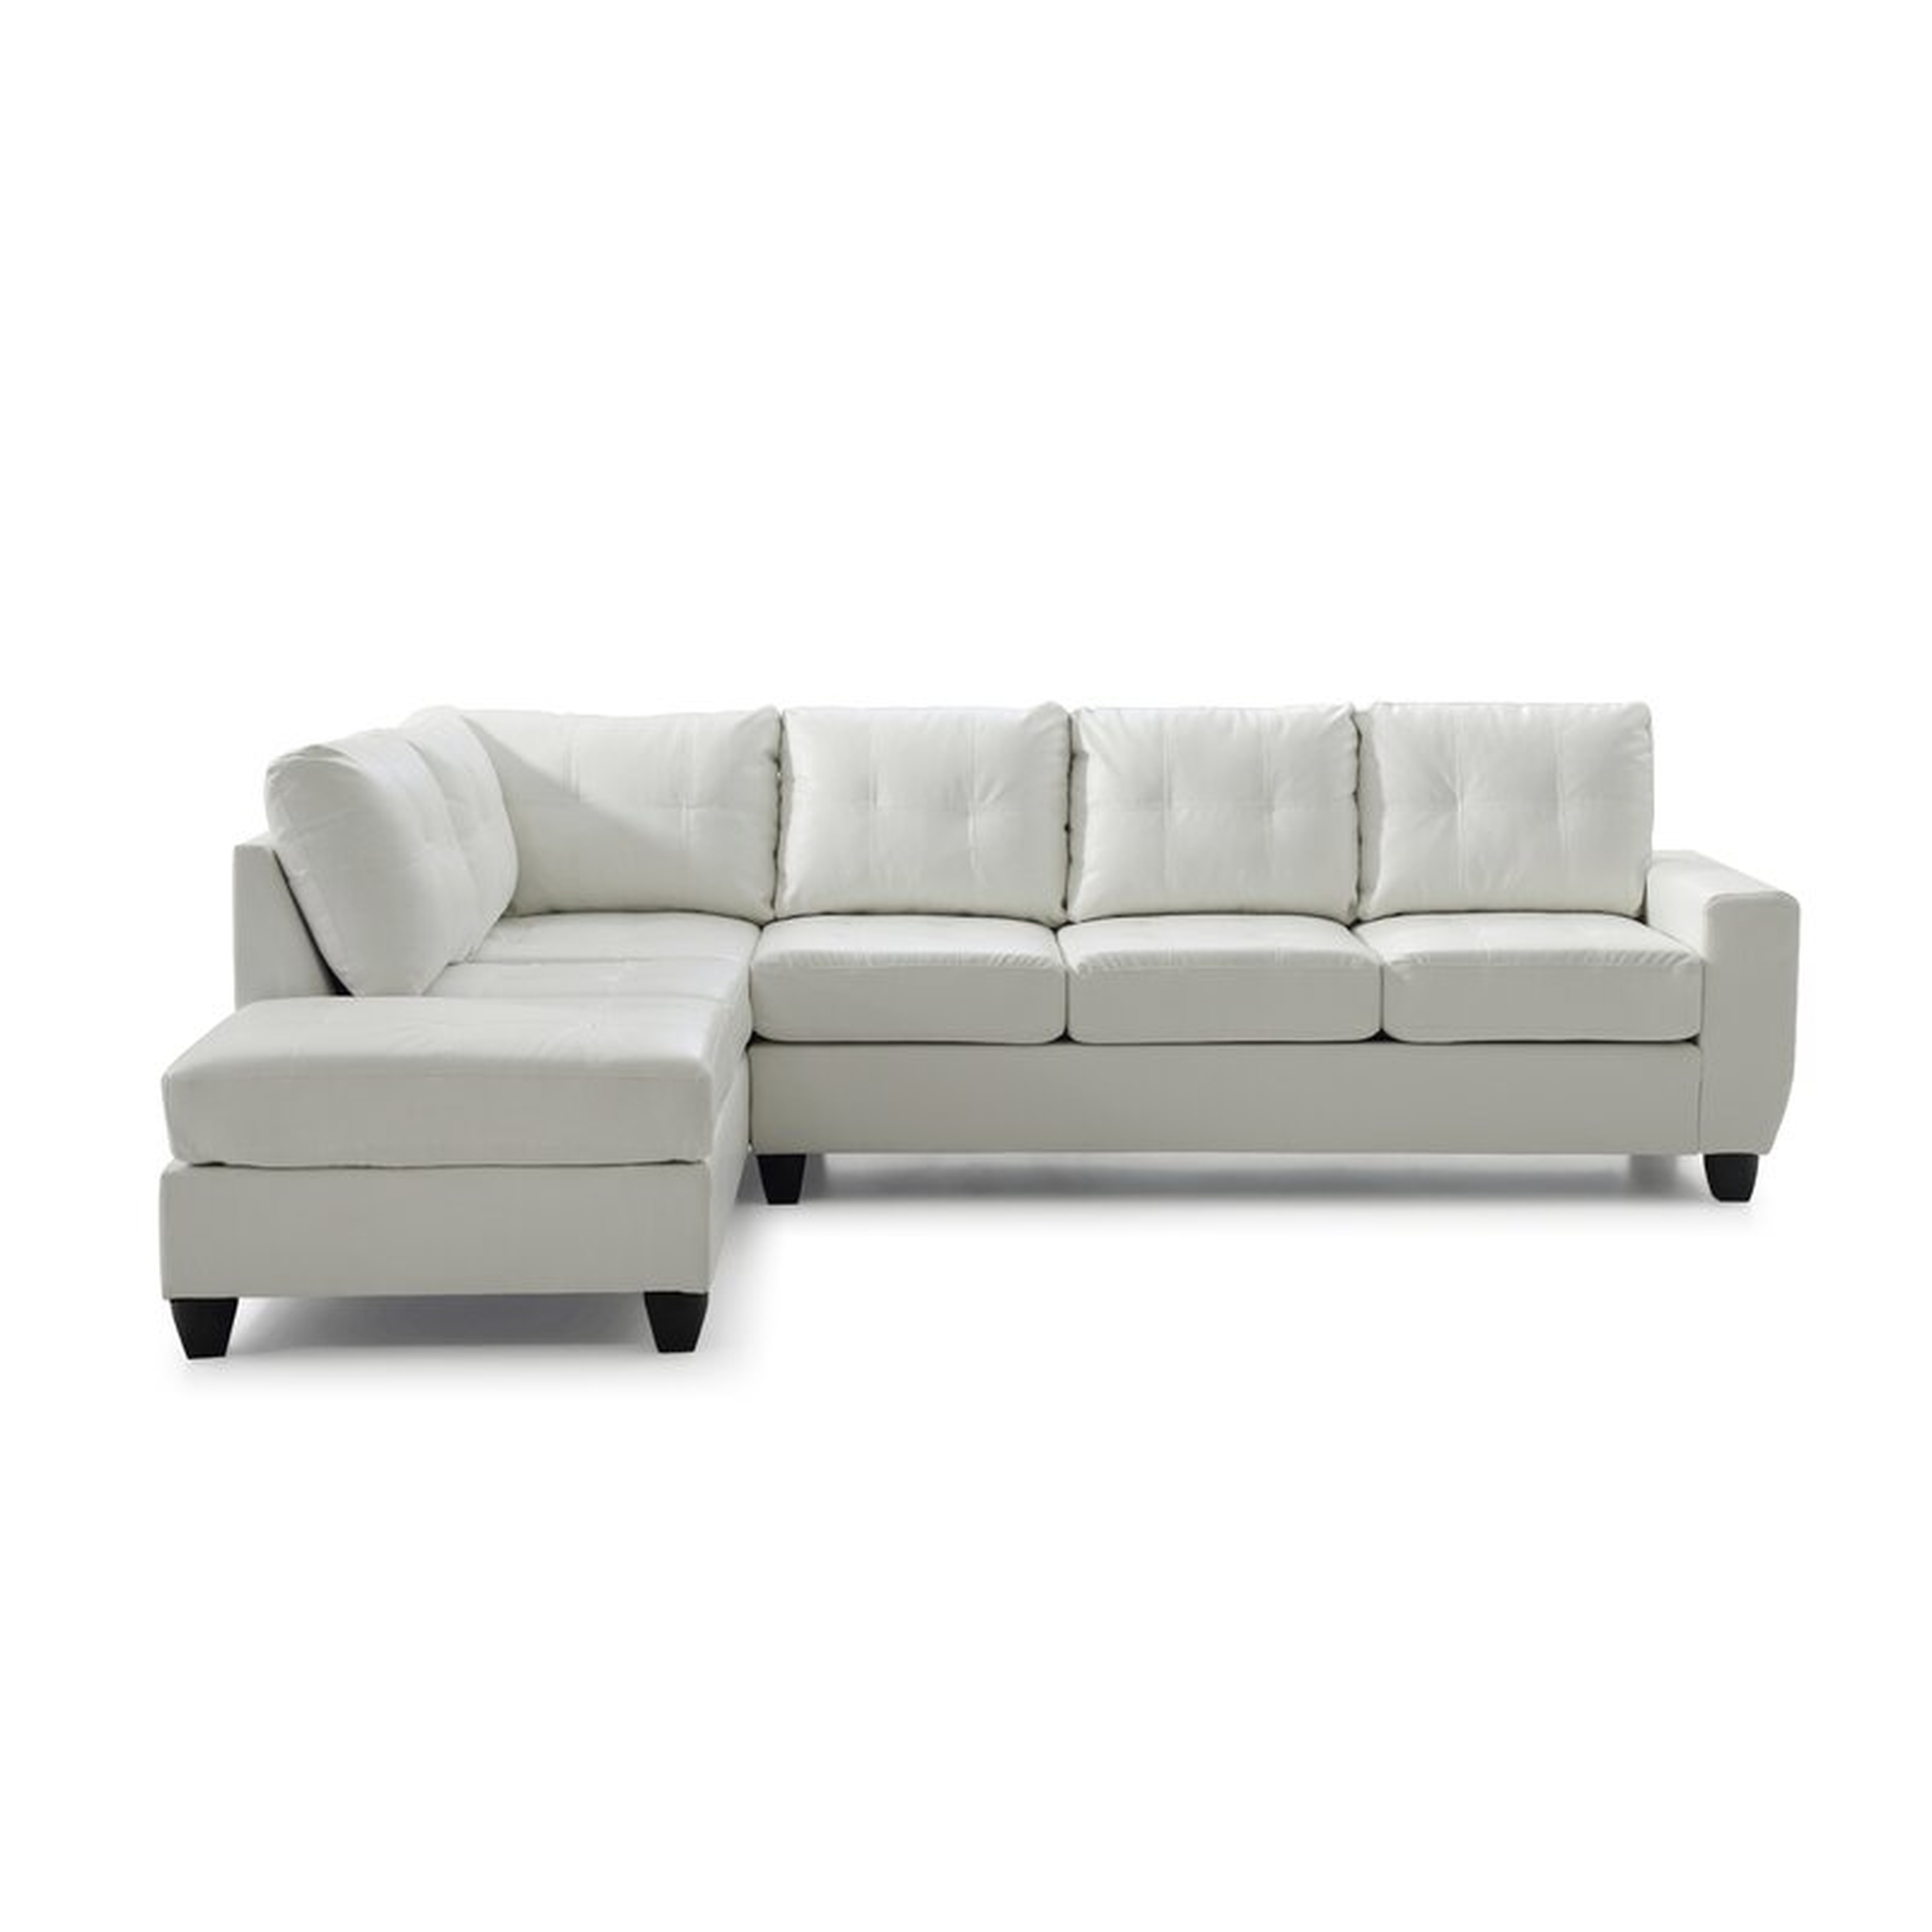 Muttontown Reversible Sectional / White Faux Leather - Wayfair